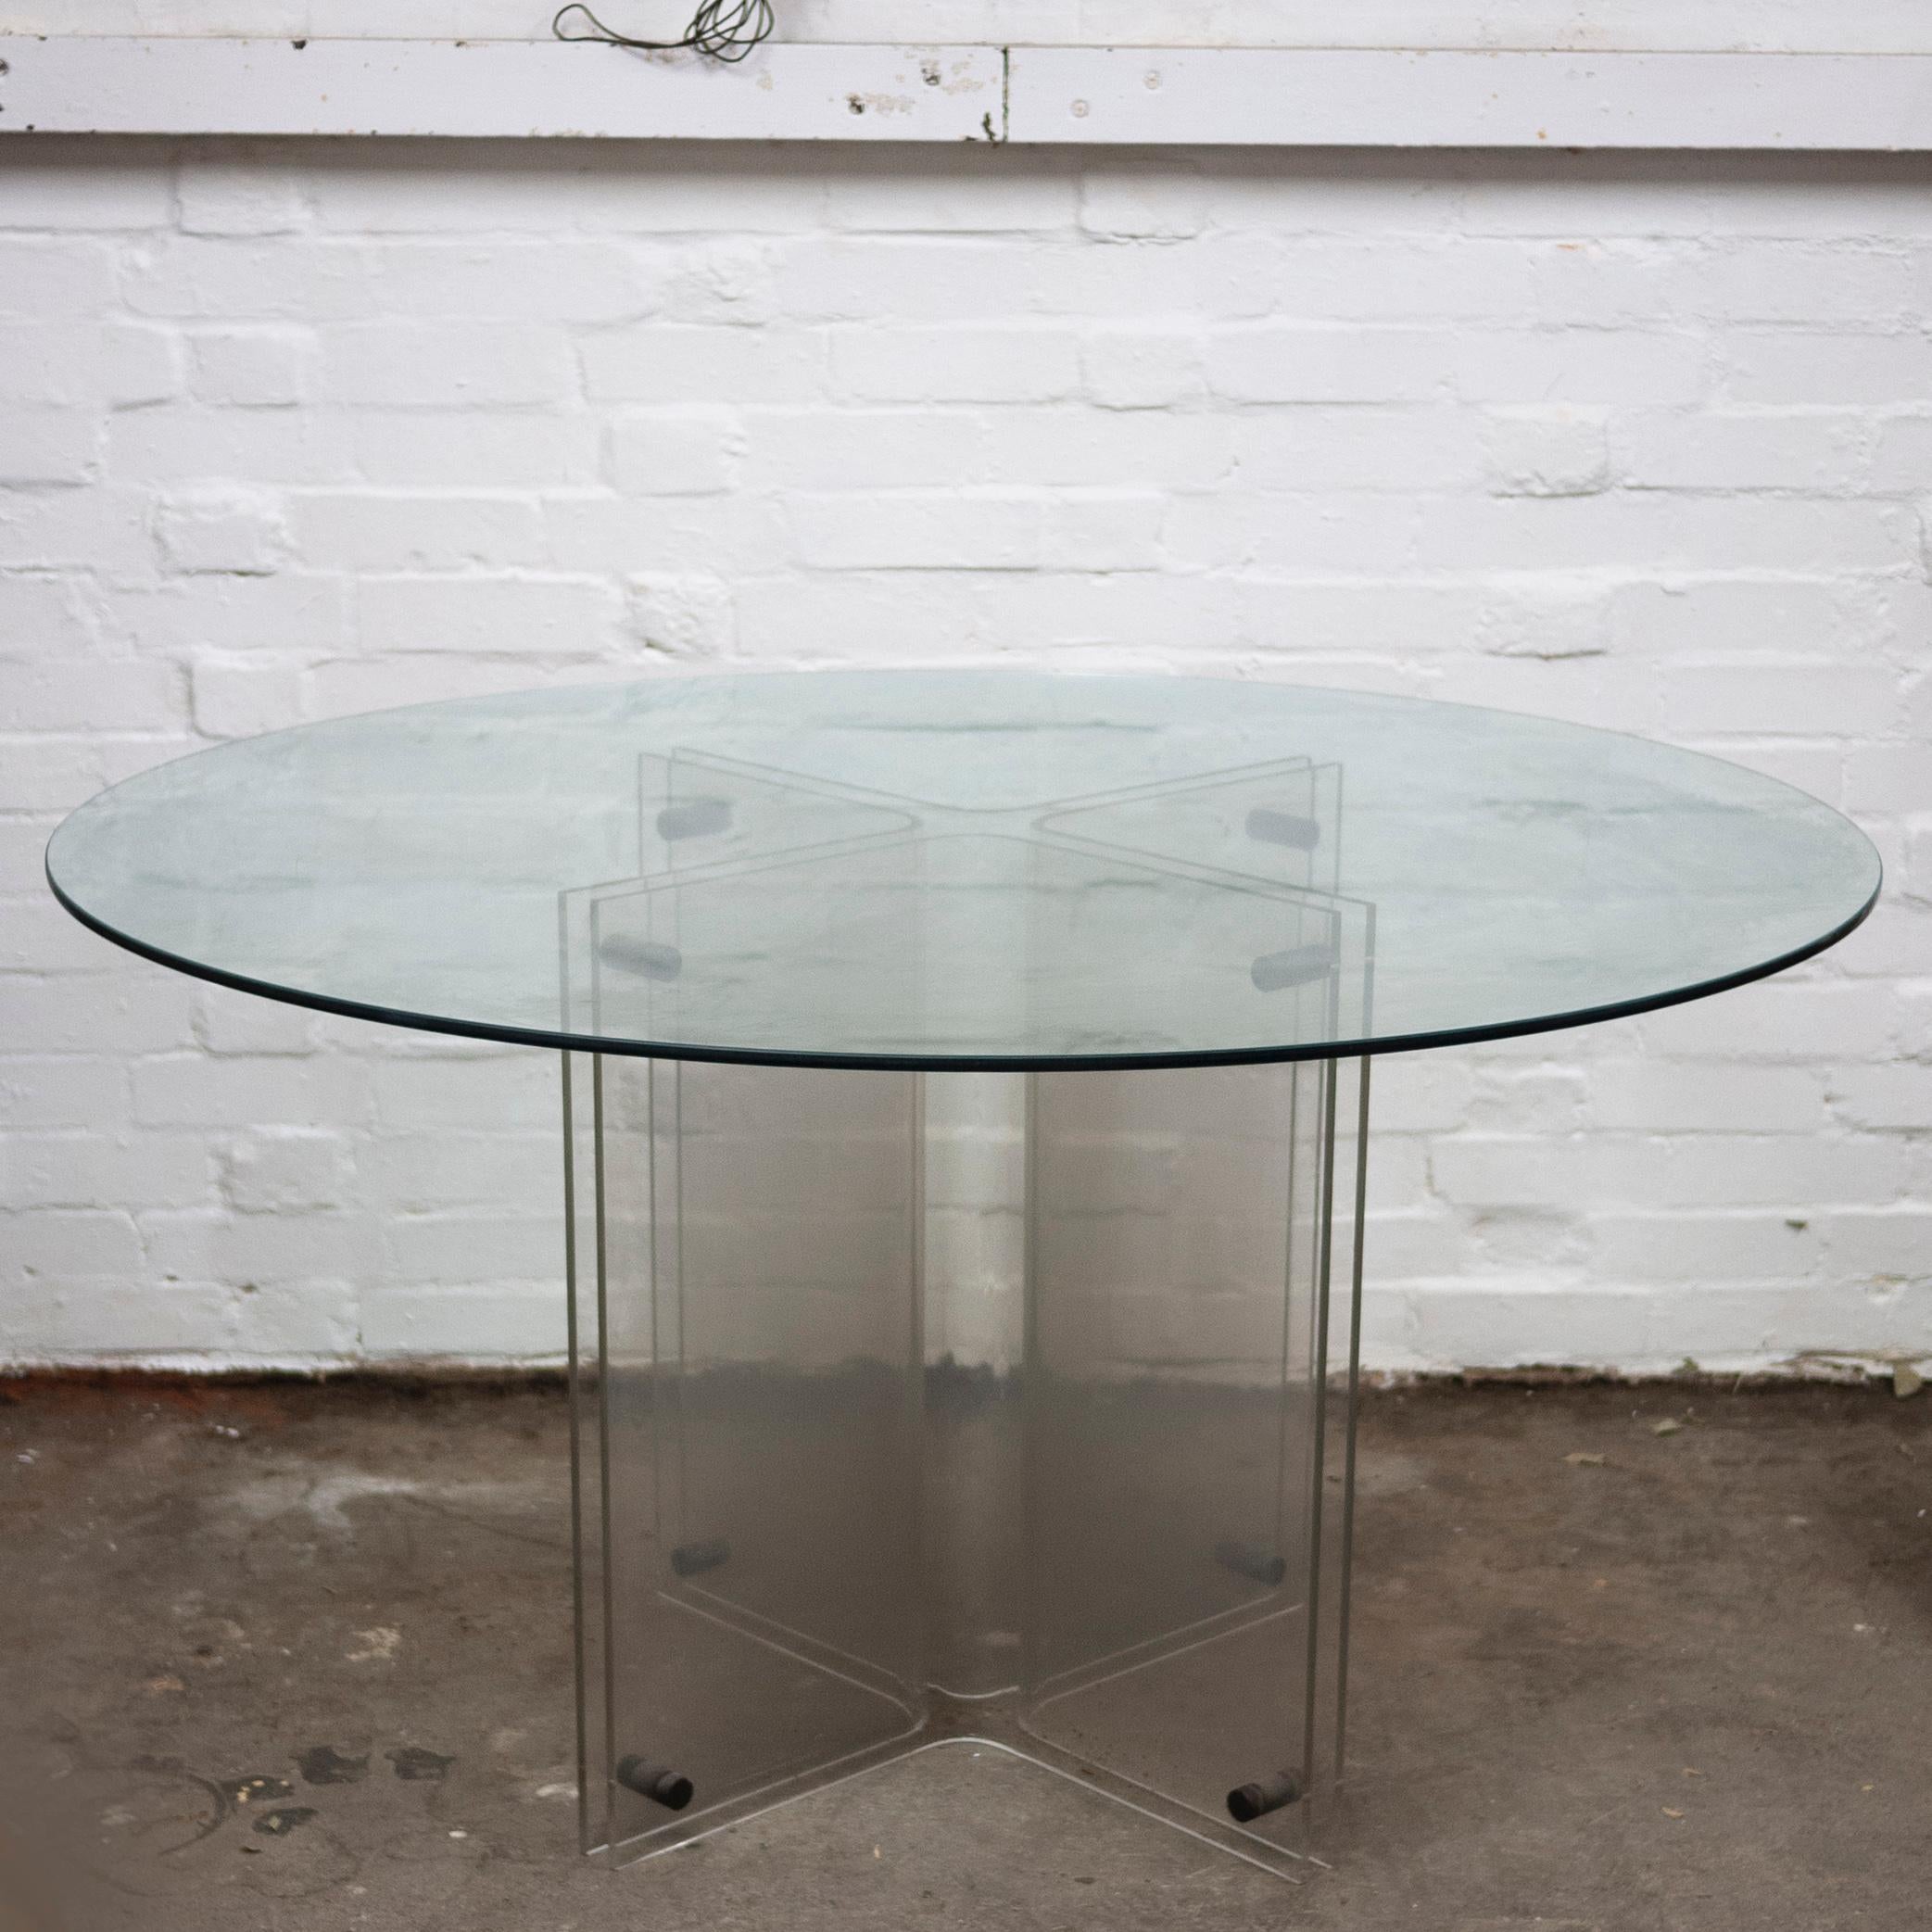 Vintage Hollywood Regency Lucite and Glass Round Dining Table, 1980s For Sale 6